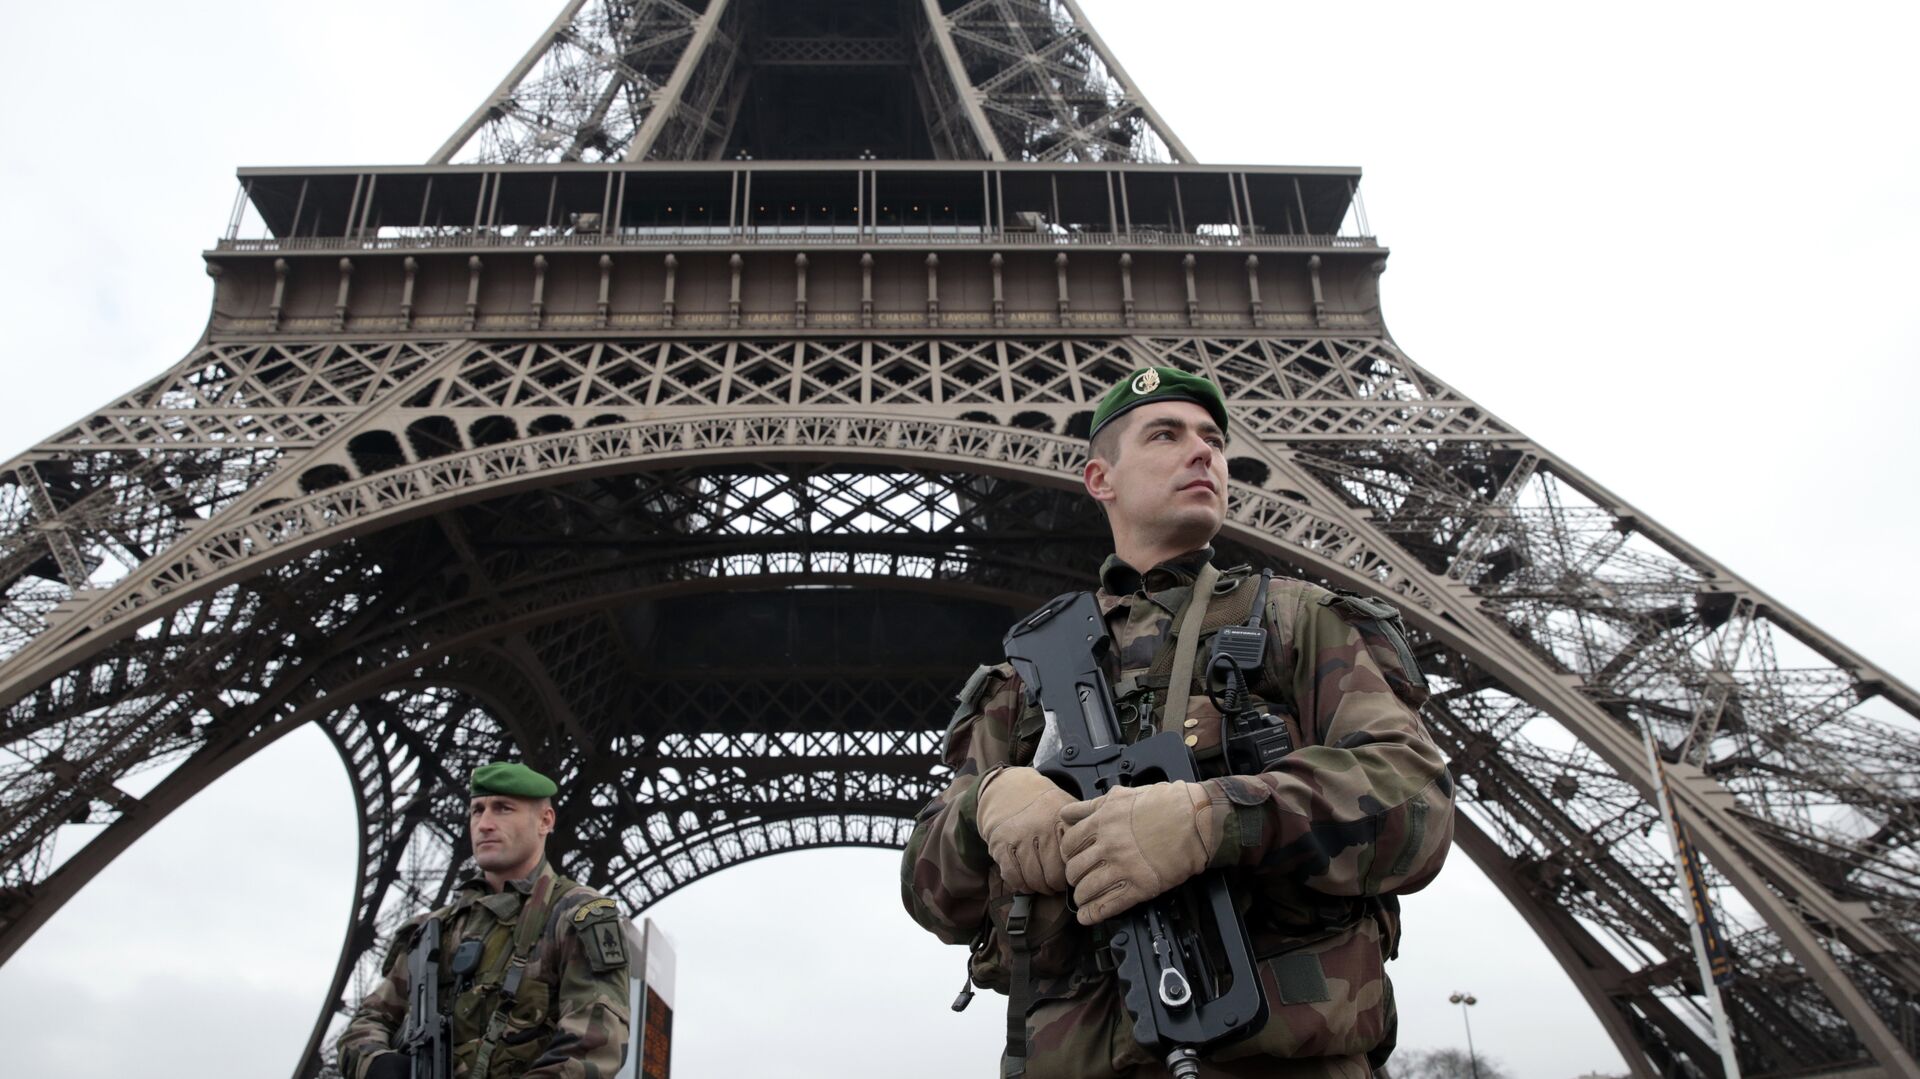 French soldiers patrol in front of the Eiffel Tower on January 7, 2015 in Paris as the capital was placed under the highest alert status after heavily armed gunmen shouting Islamist slogans stormed French satirical newspaper Charlie Hebdo and shot dead at least 12 people in the deadliest attack in France in four decades - Sputnik International, 1920, 08.09.2021